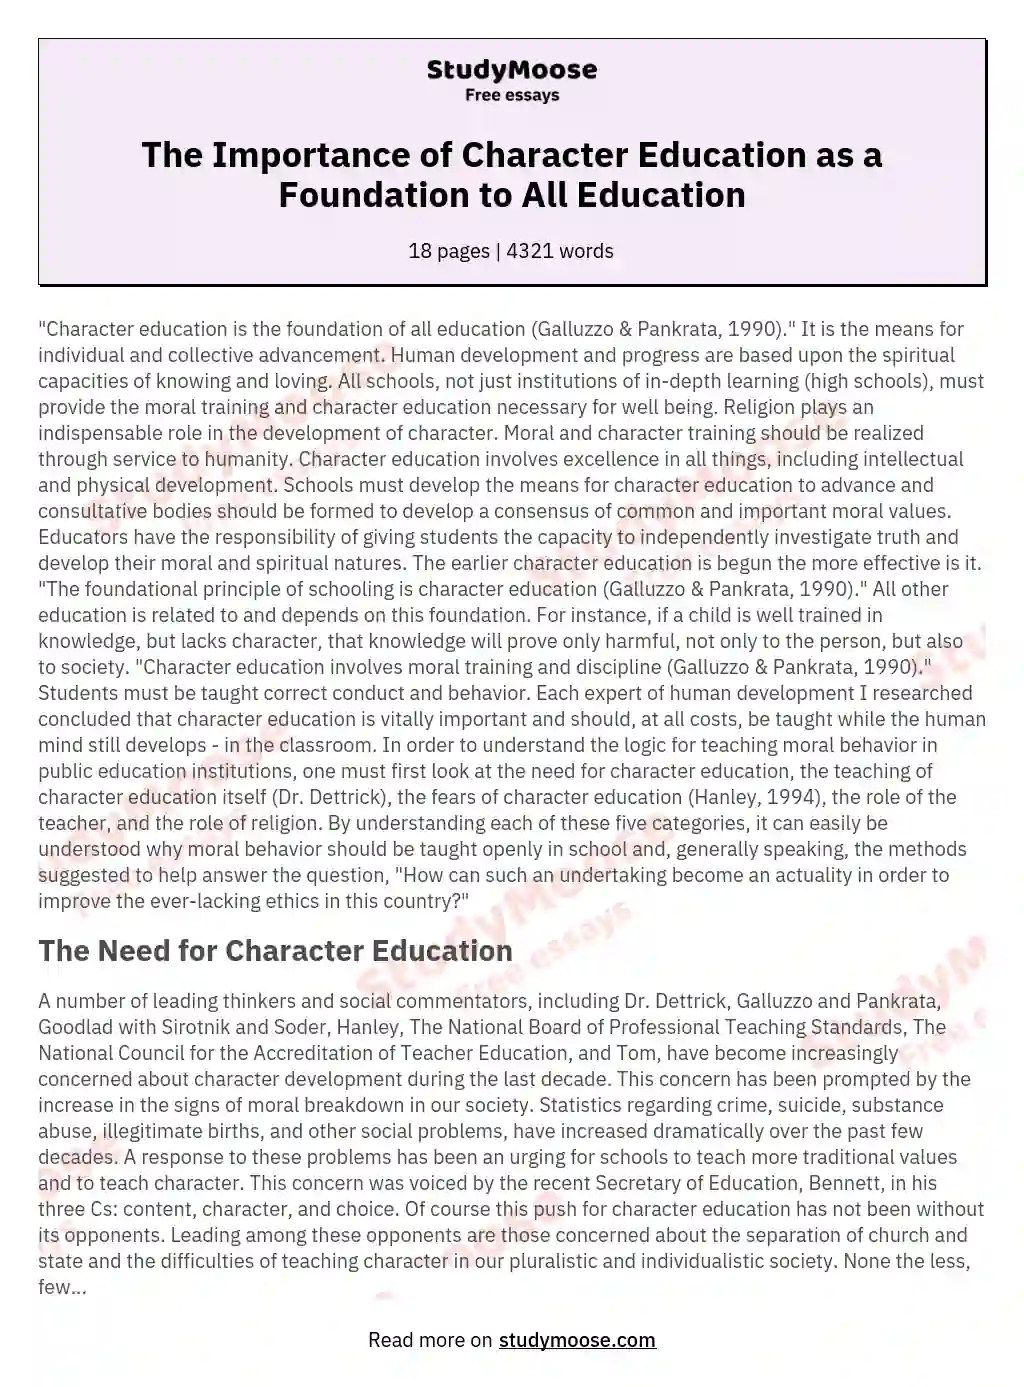 The Importance of Character Education as a Foundation to All Education essay